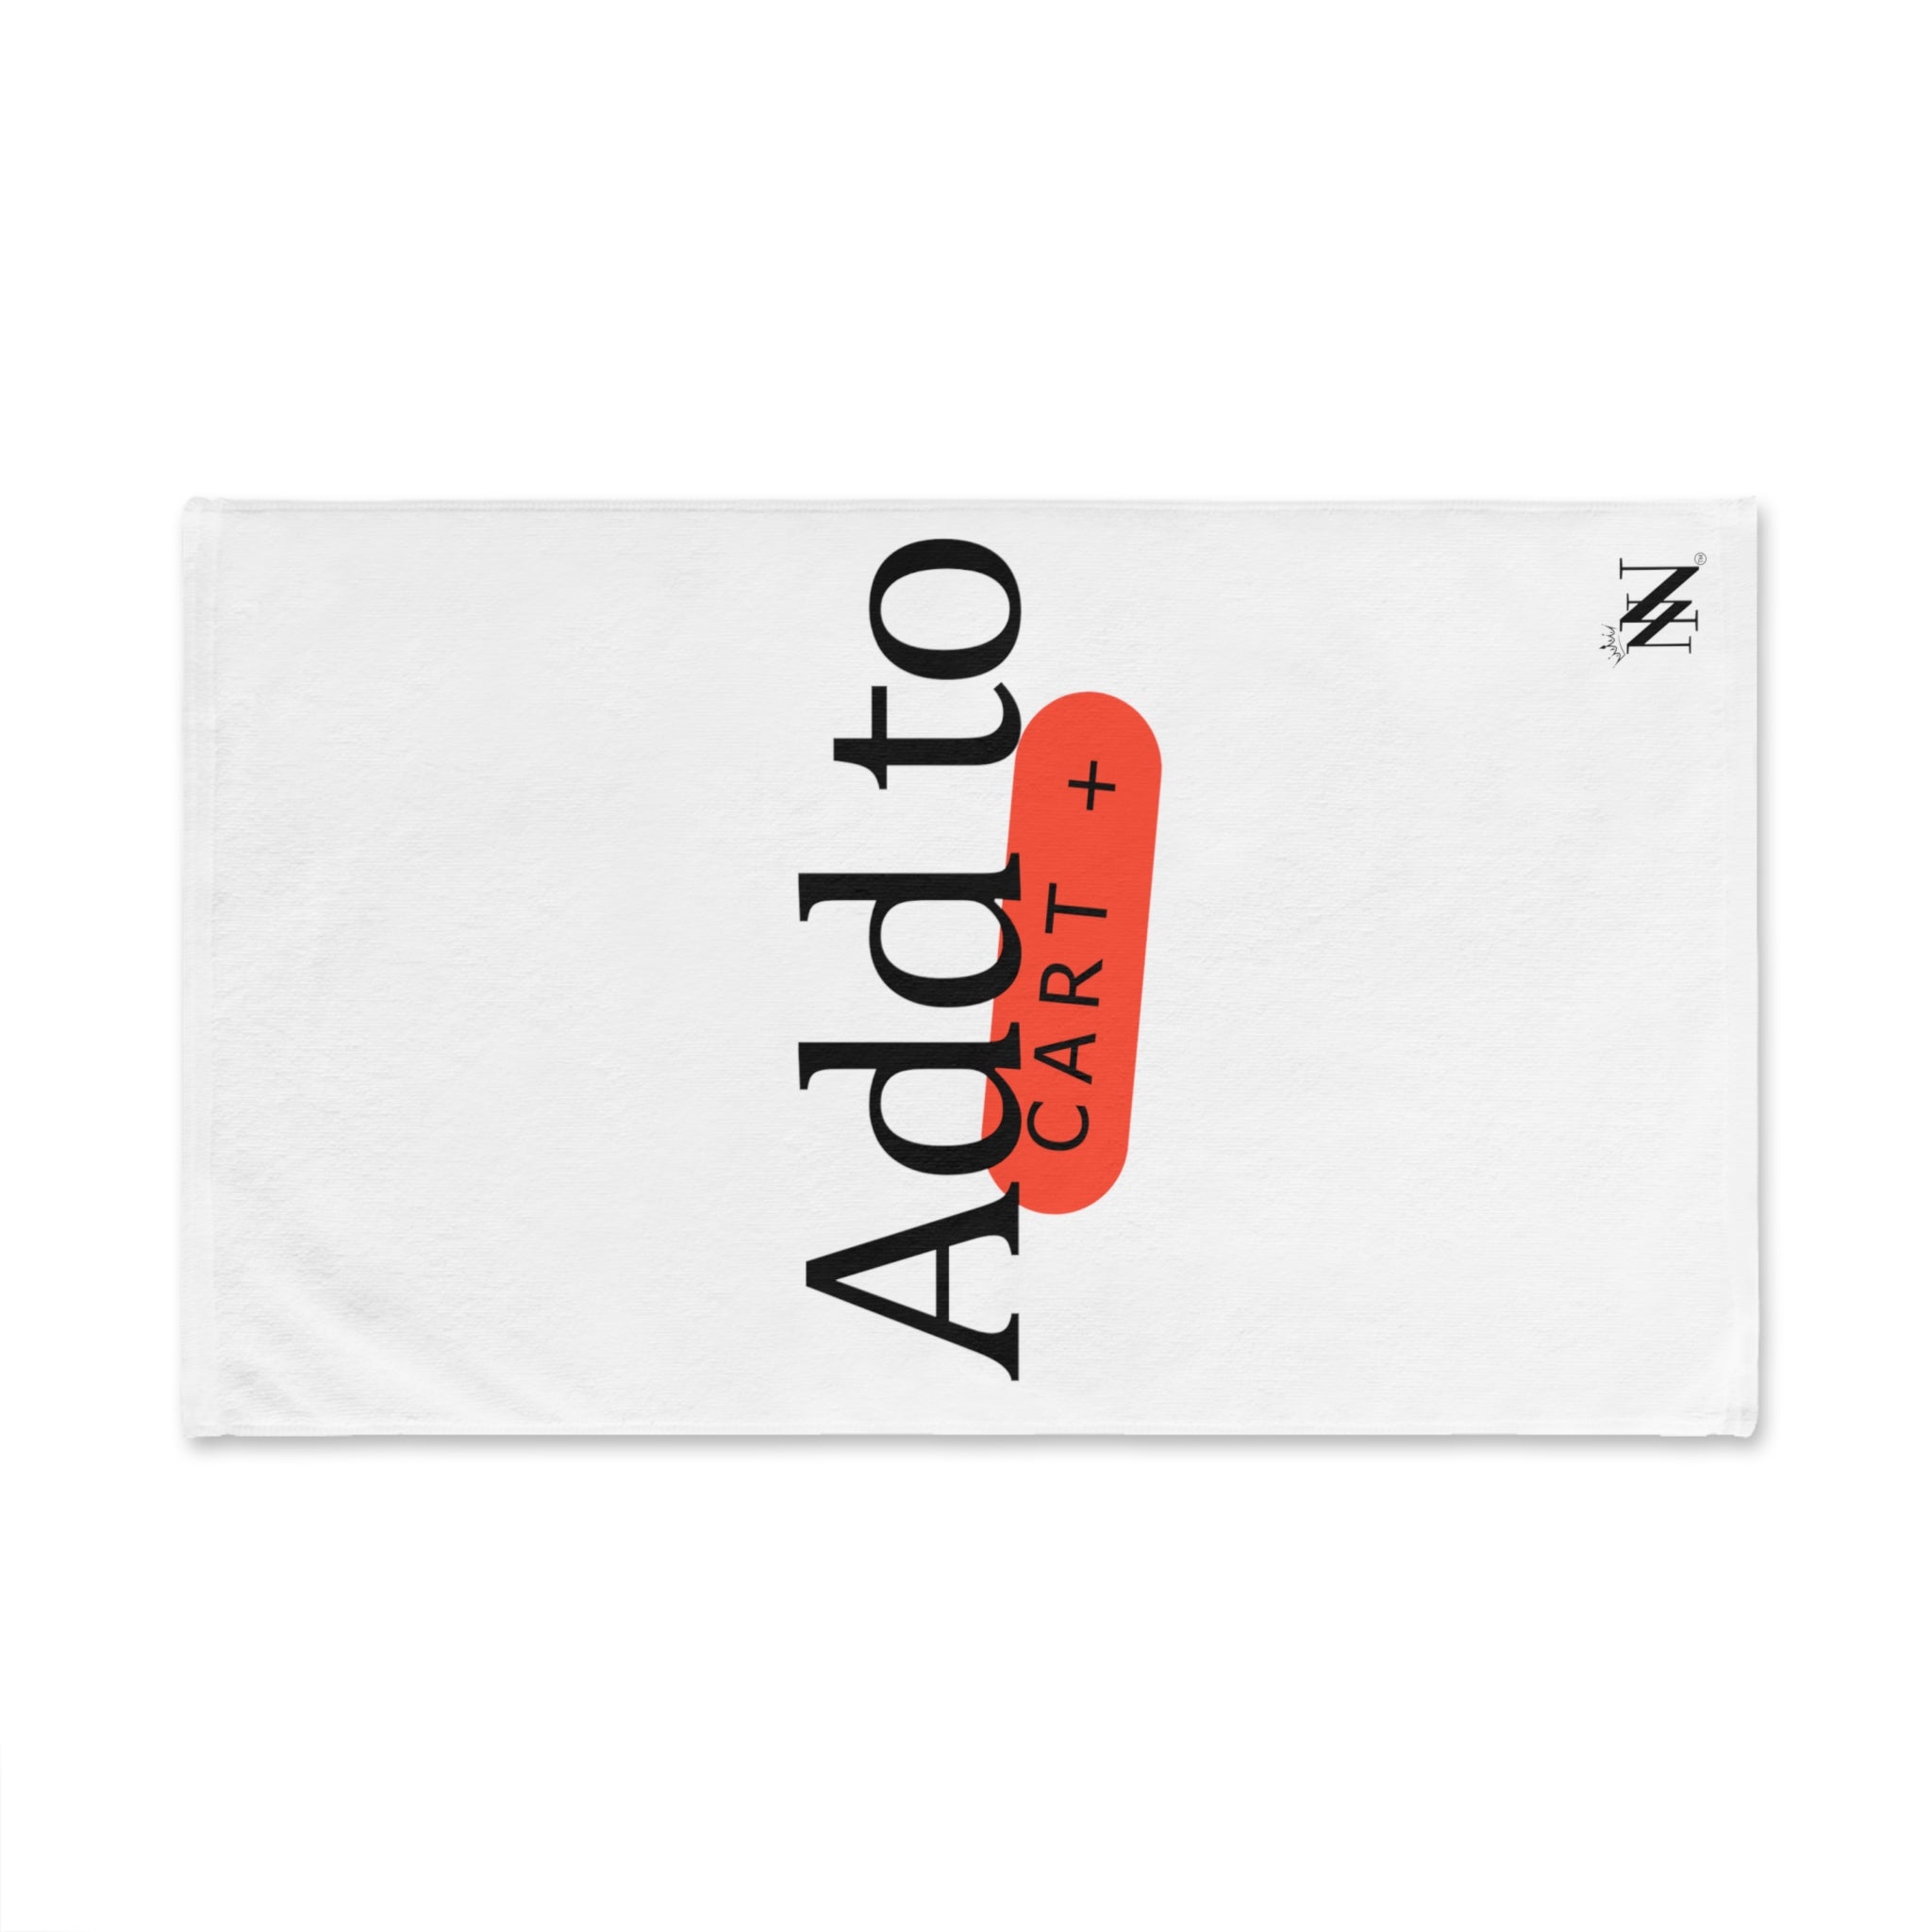 Add to Cart | Nectar Napkins Fun-Flirty Lovers' After Sex Towels NECTAR NAPKINS